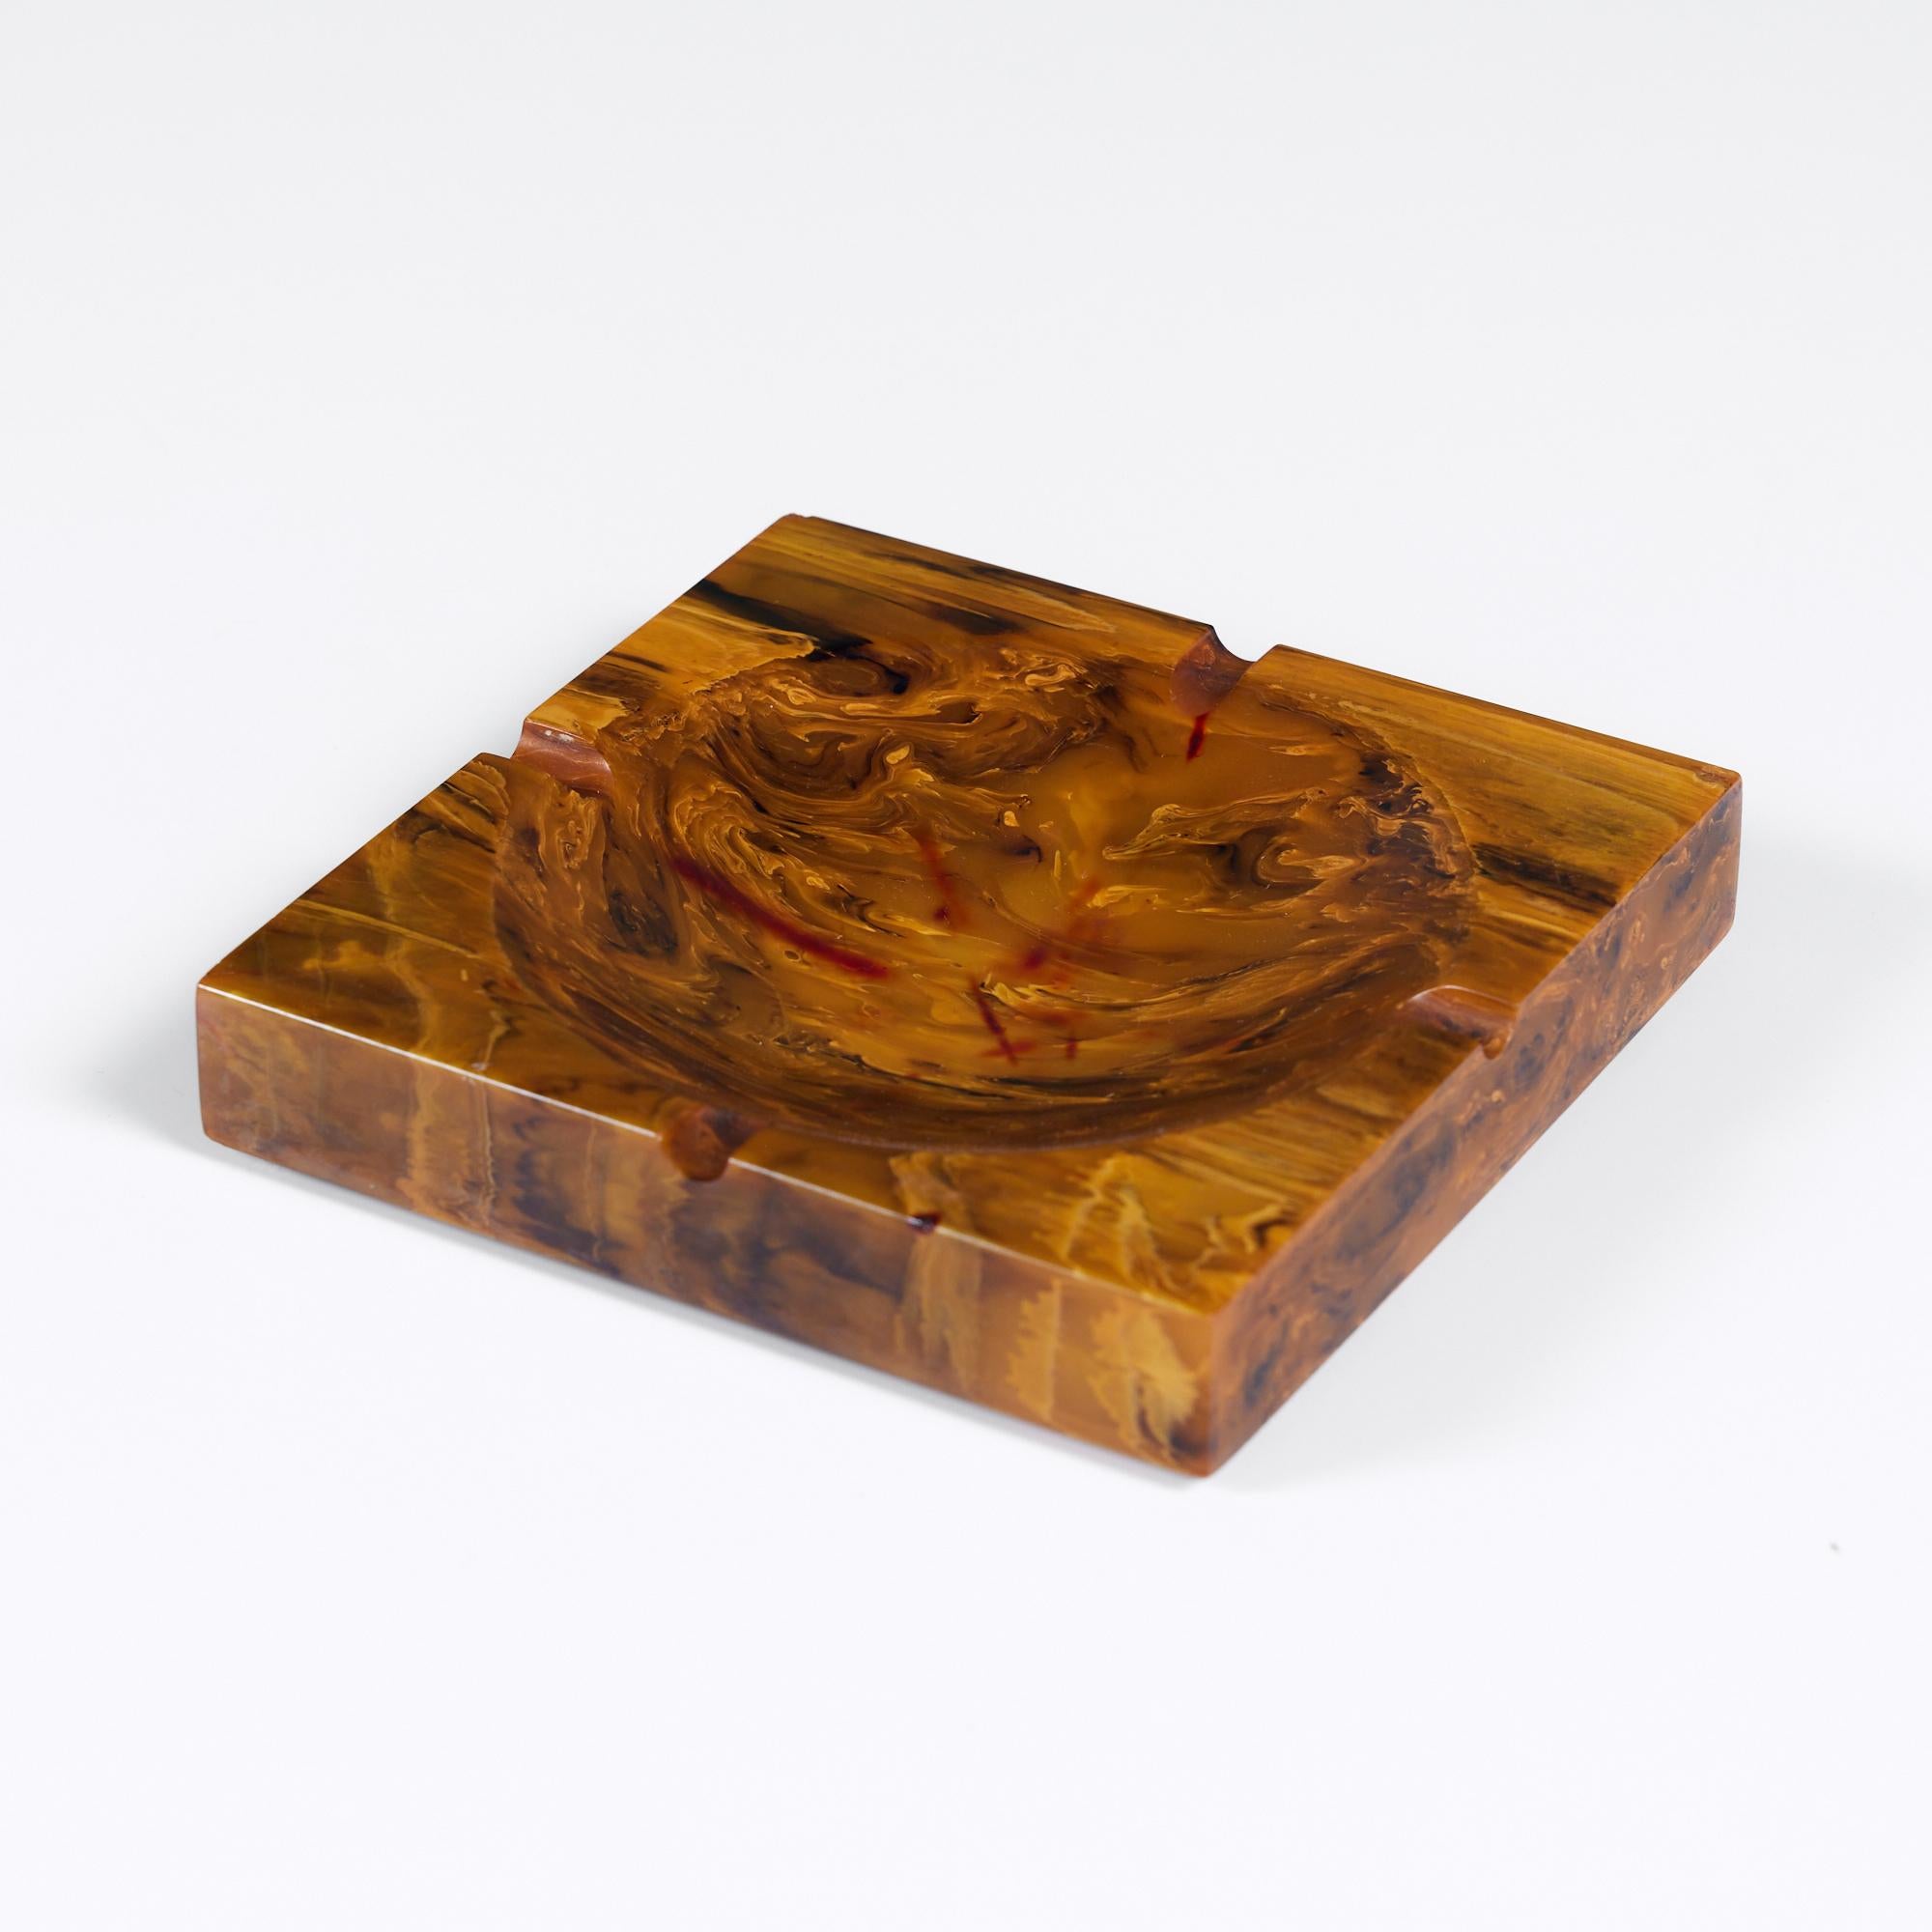 Square ashtray with a low profile and wide bowl in polished resin. The ashtray features an all over tigers eye like pattern. This piece can be used for its original purpose or as a catchall, vide-poche or decorative dish. 

Dimensions
5.75” diameter